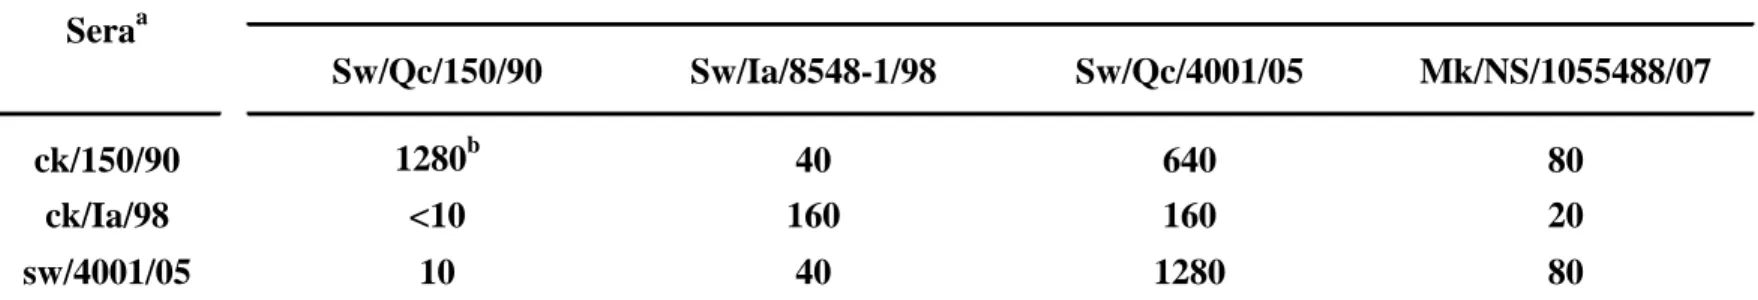 Table 1. Antigenic reactivity of mink influenza virus isolate with reference specific antisera                 by hemagglutination inhibition assay